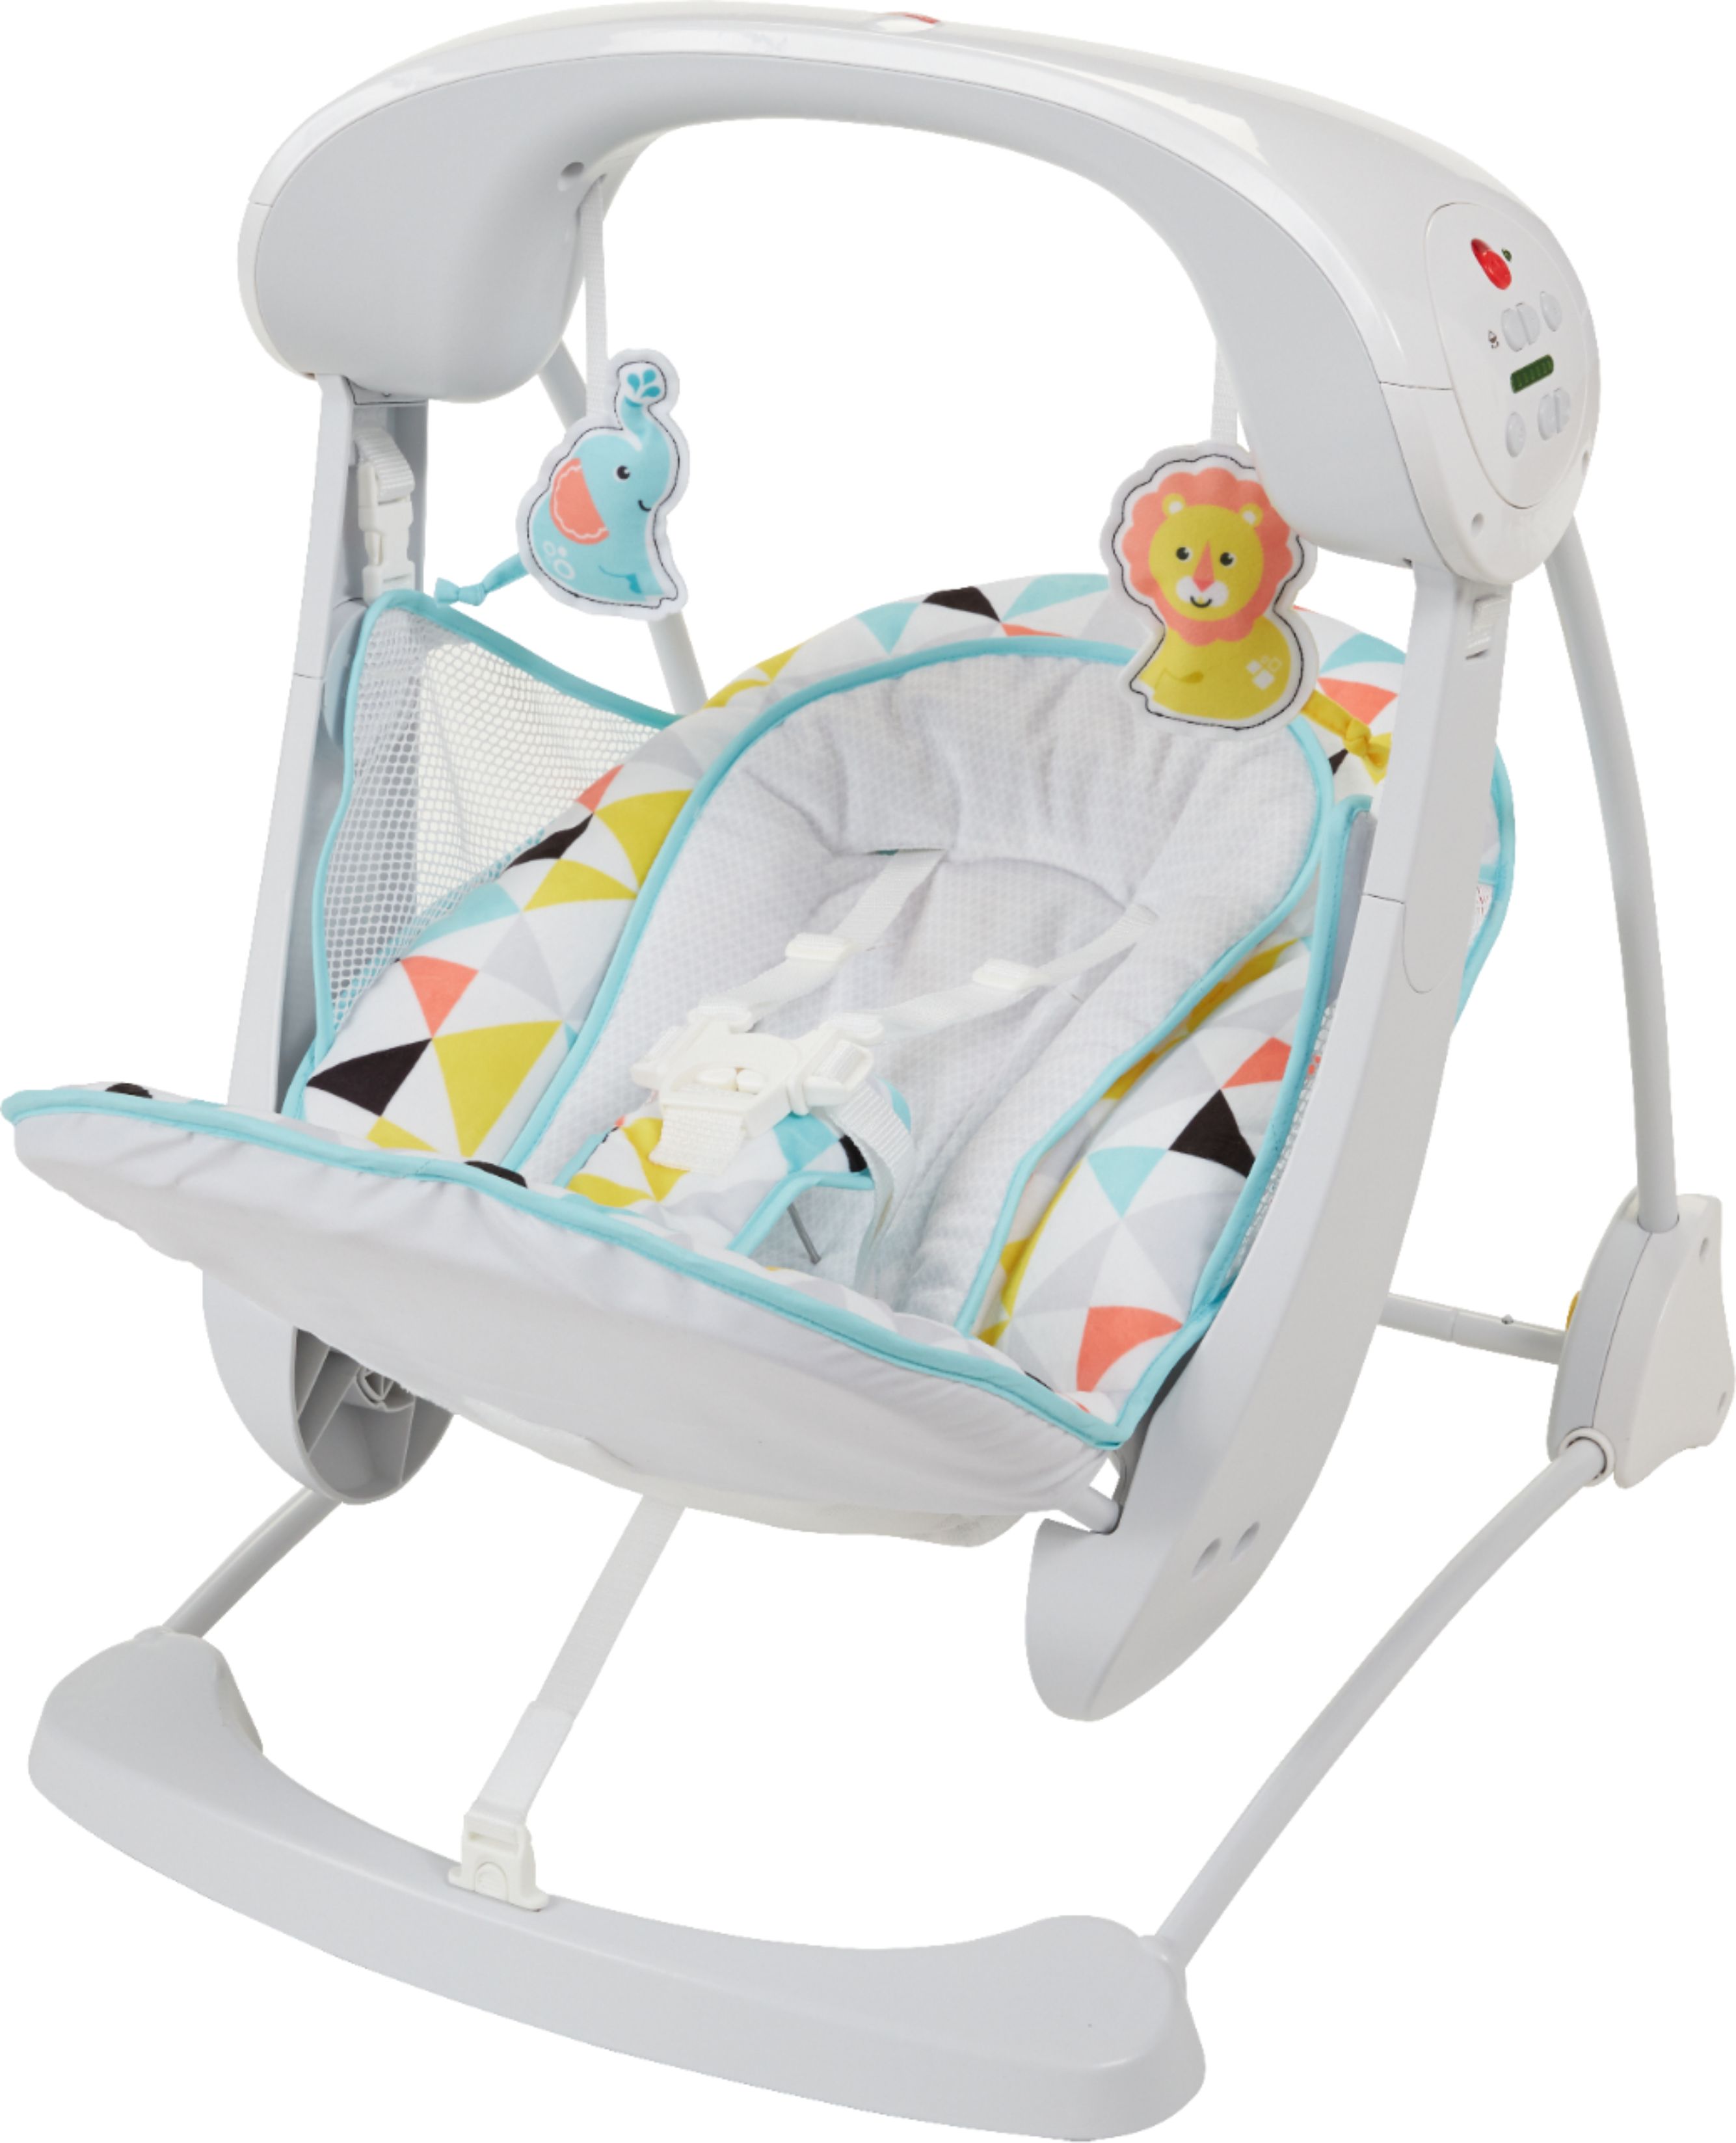 White Deluxe Take-Along Swing and Seat Elephant and Tiger Fisher Price 